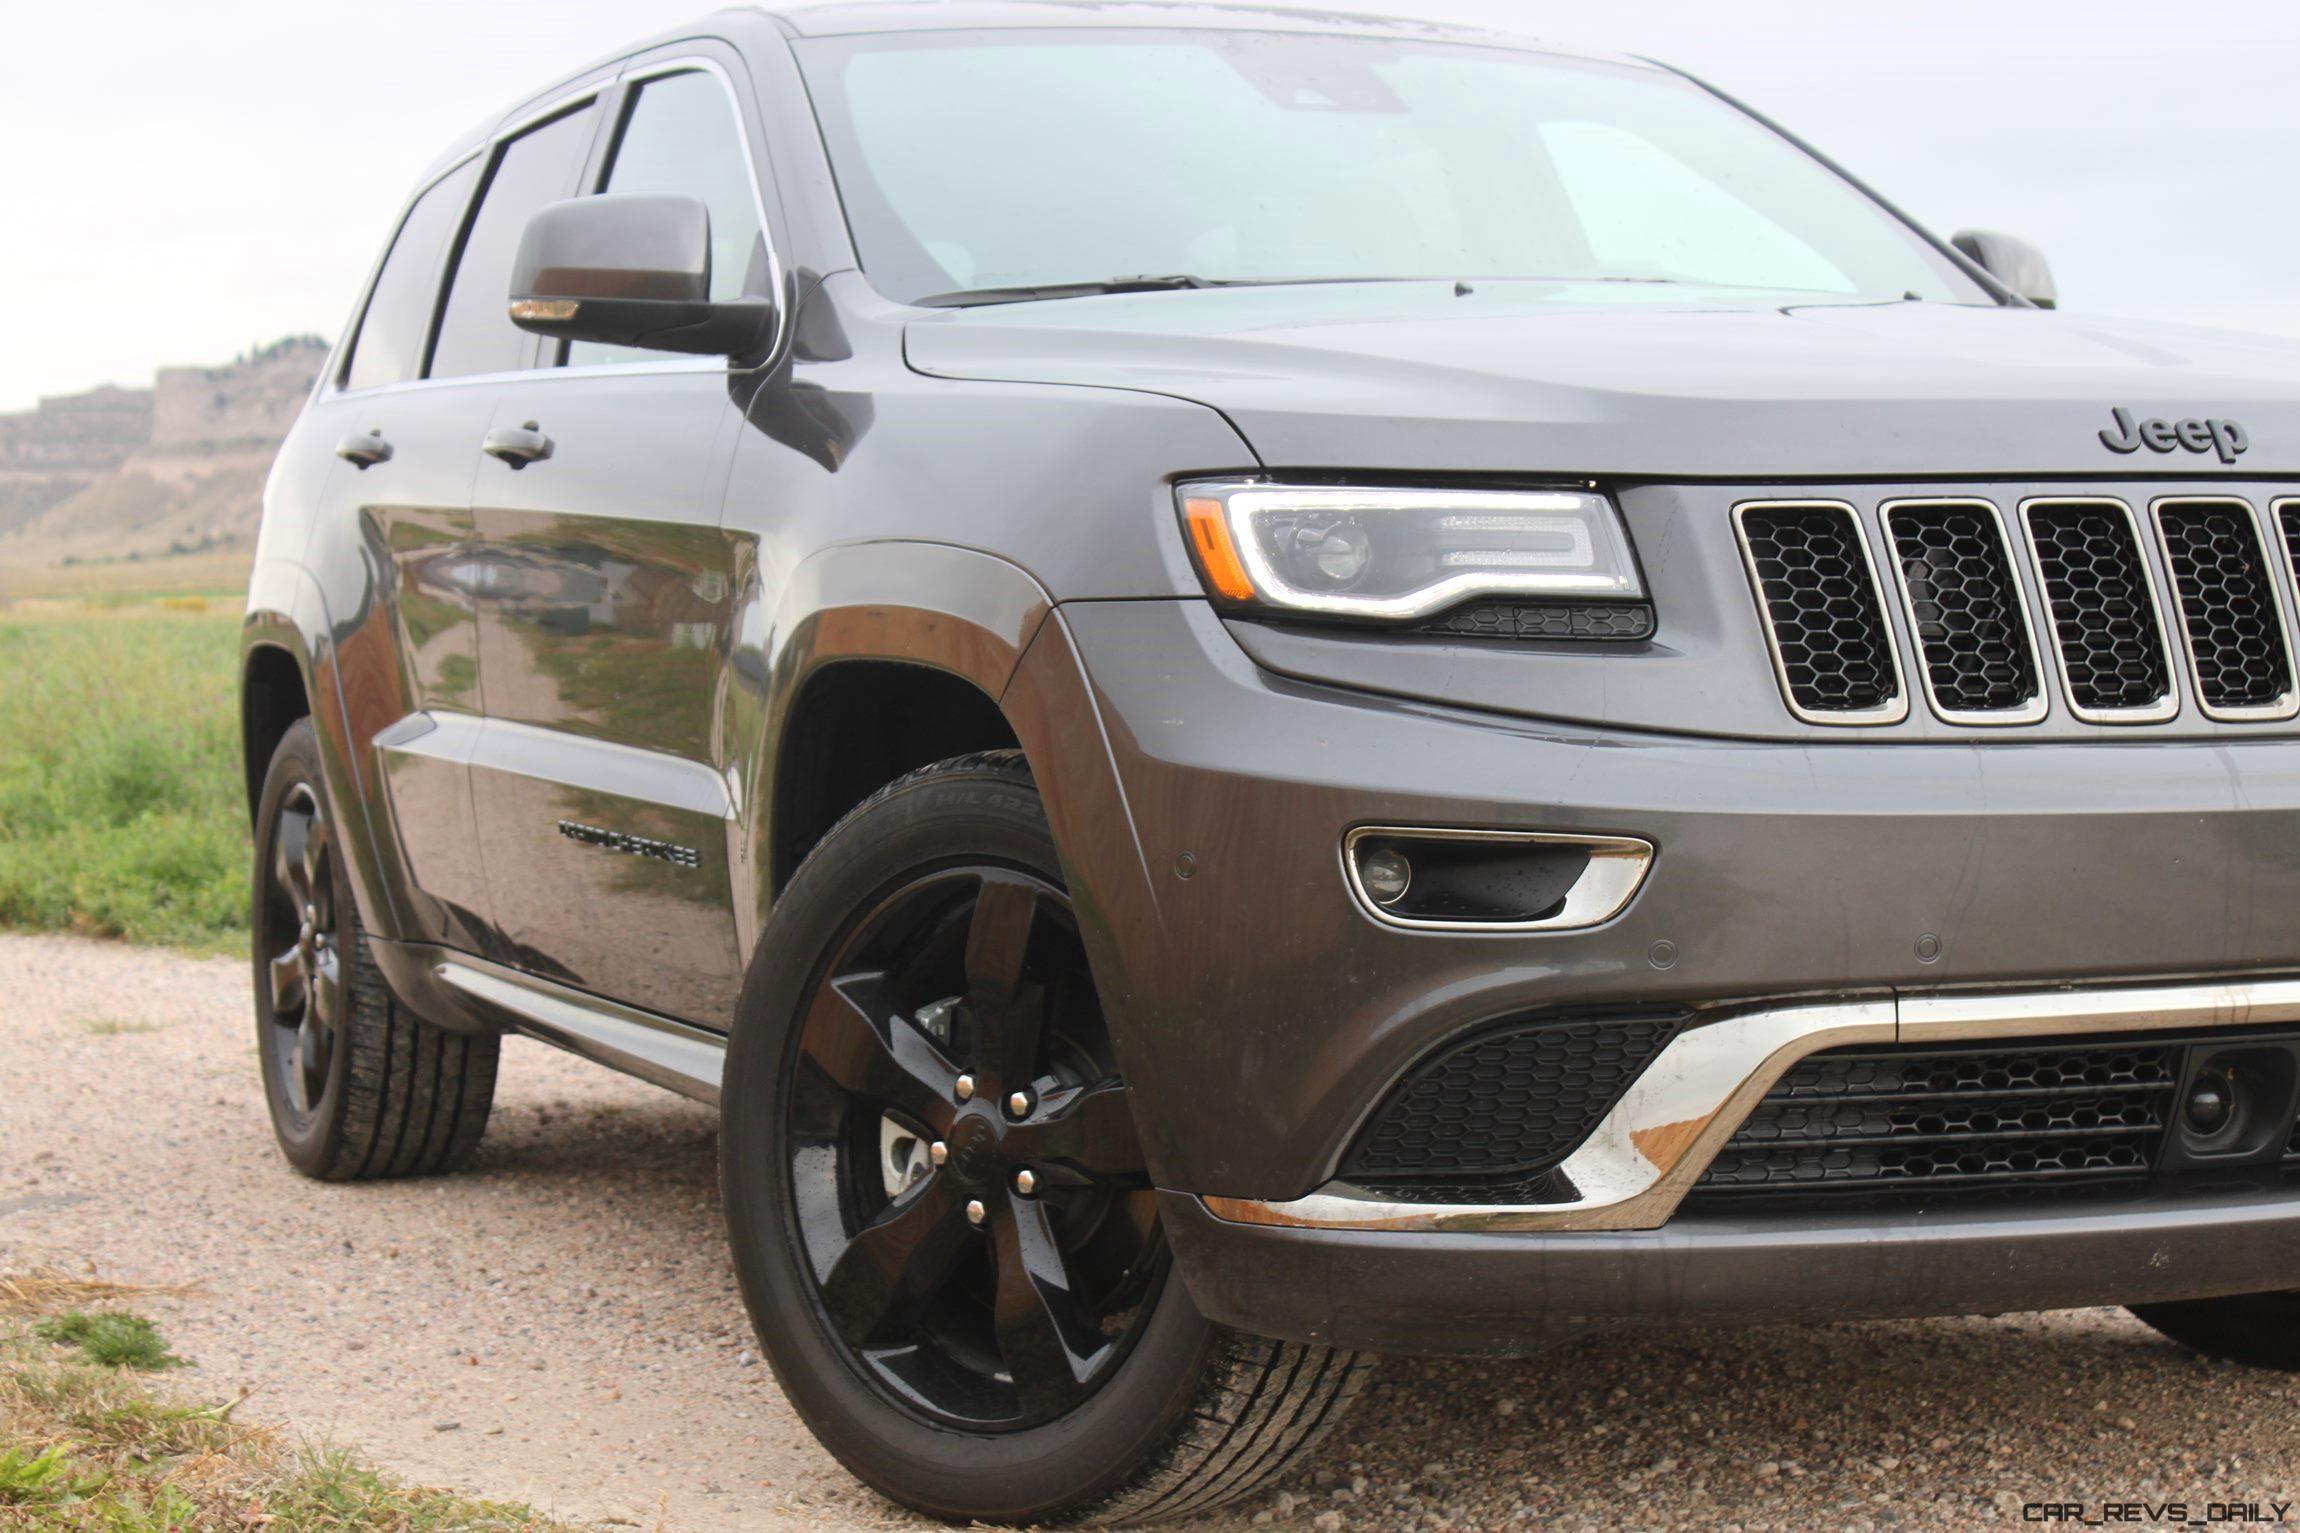 2016 Jeep Grand Cherokee Overland Ecodiesel Review By Tim Esterdahl